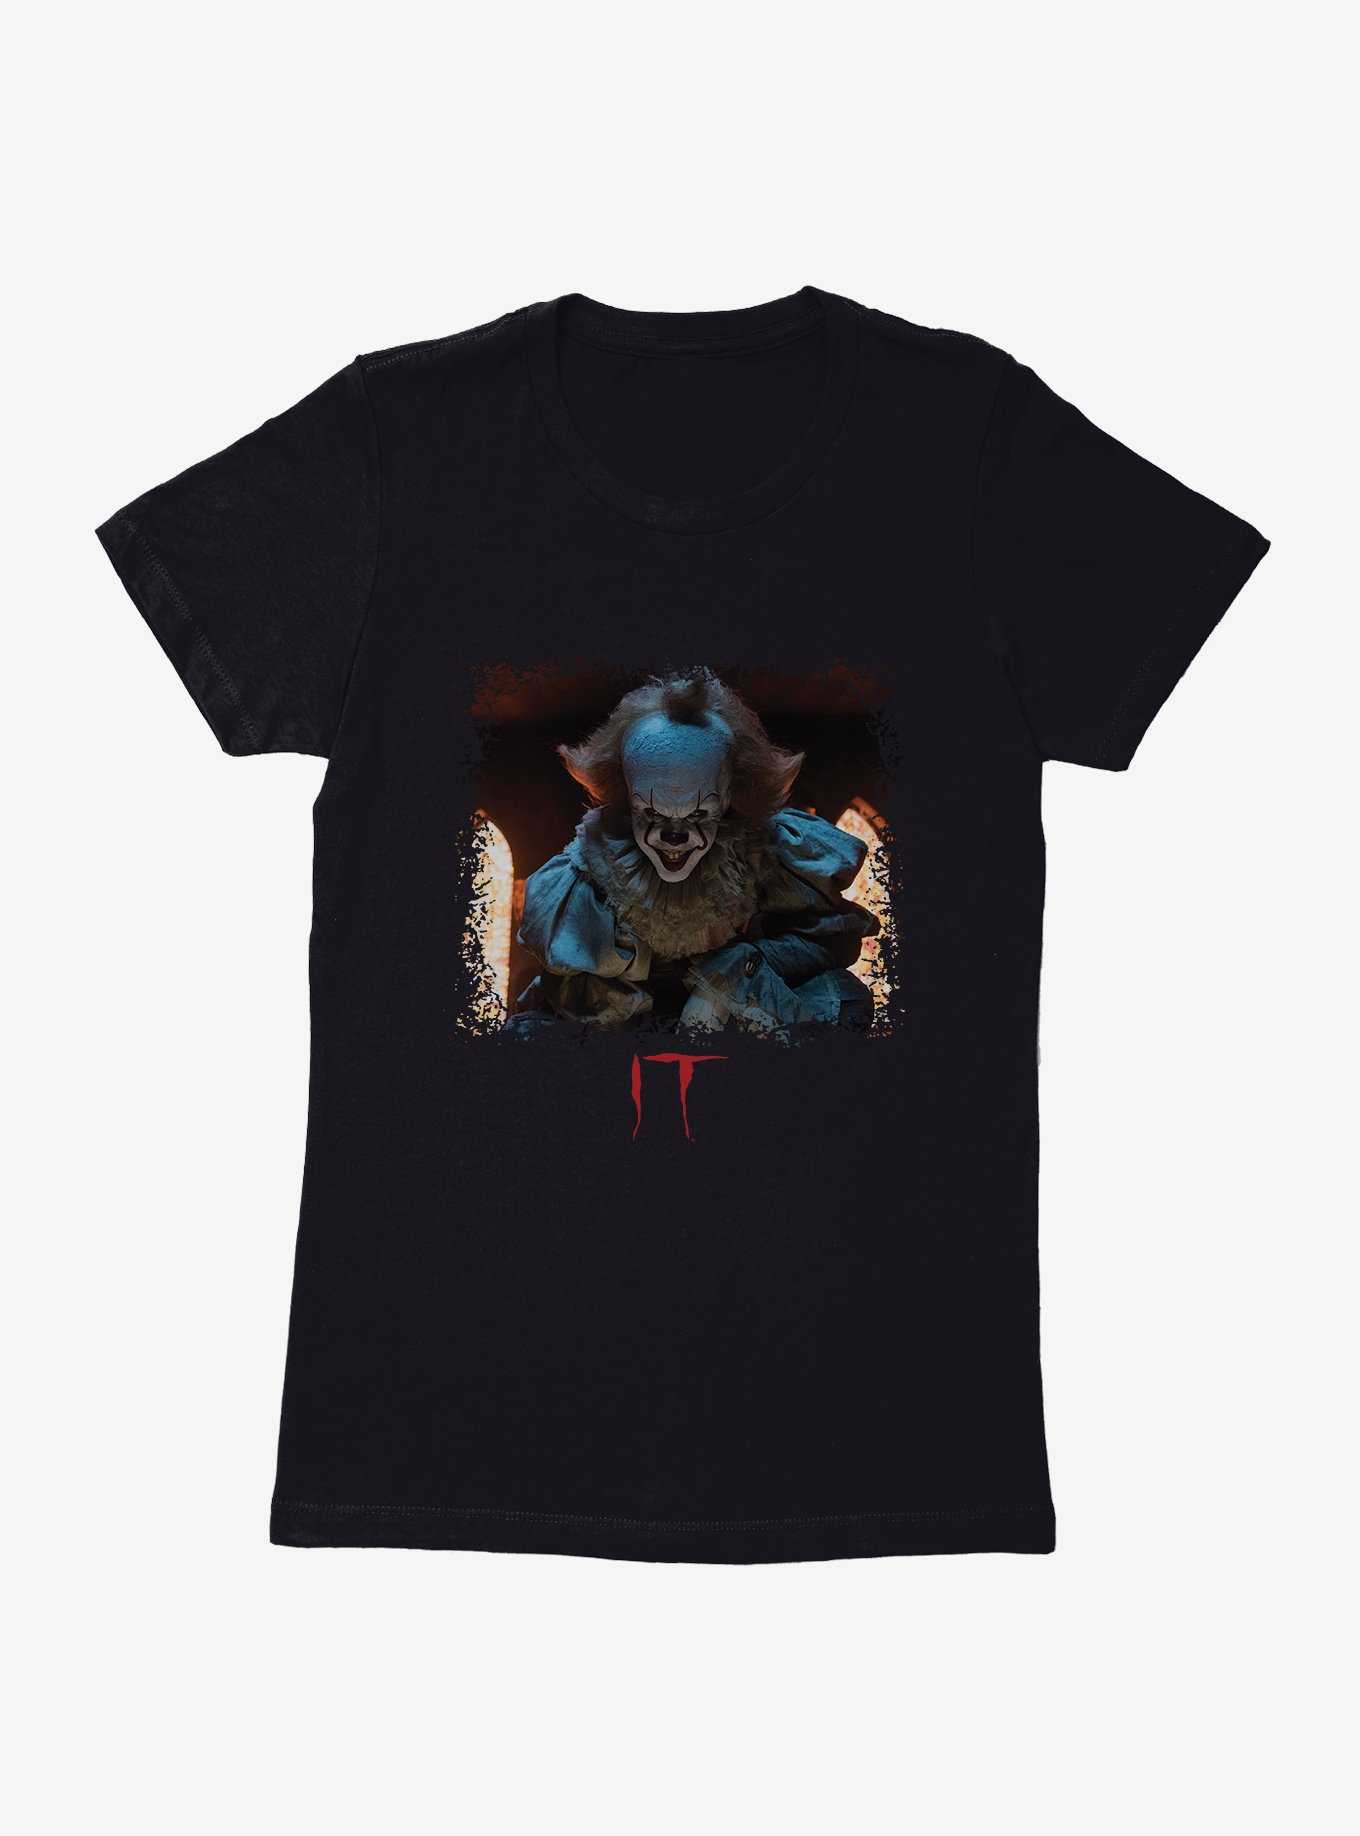 IT Pennywise Mischievous Smile Womens T-Shirt, , hi-res